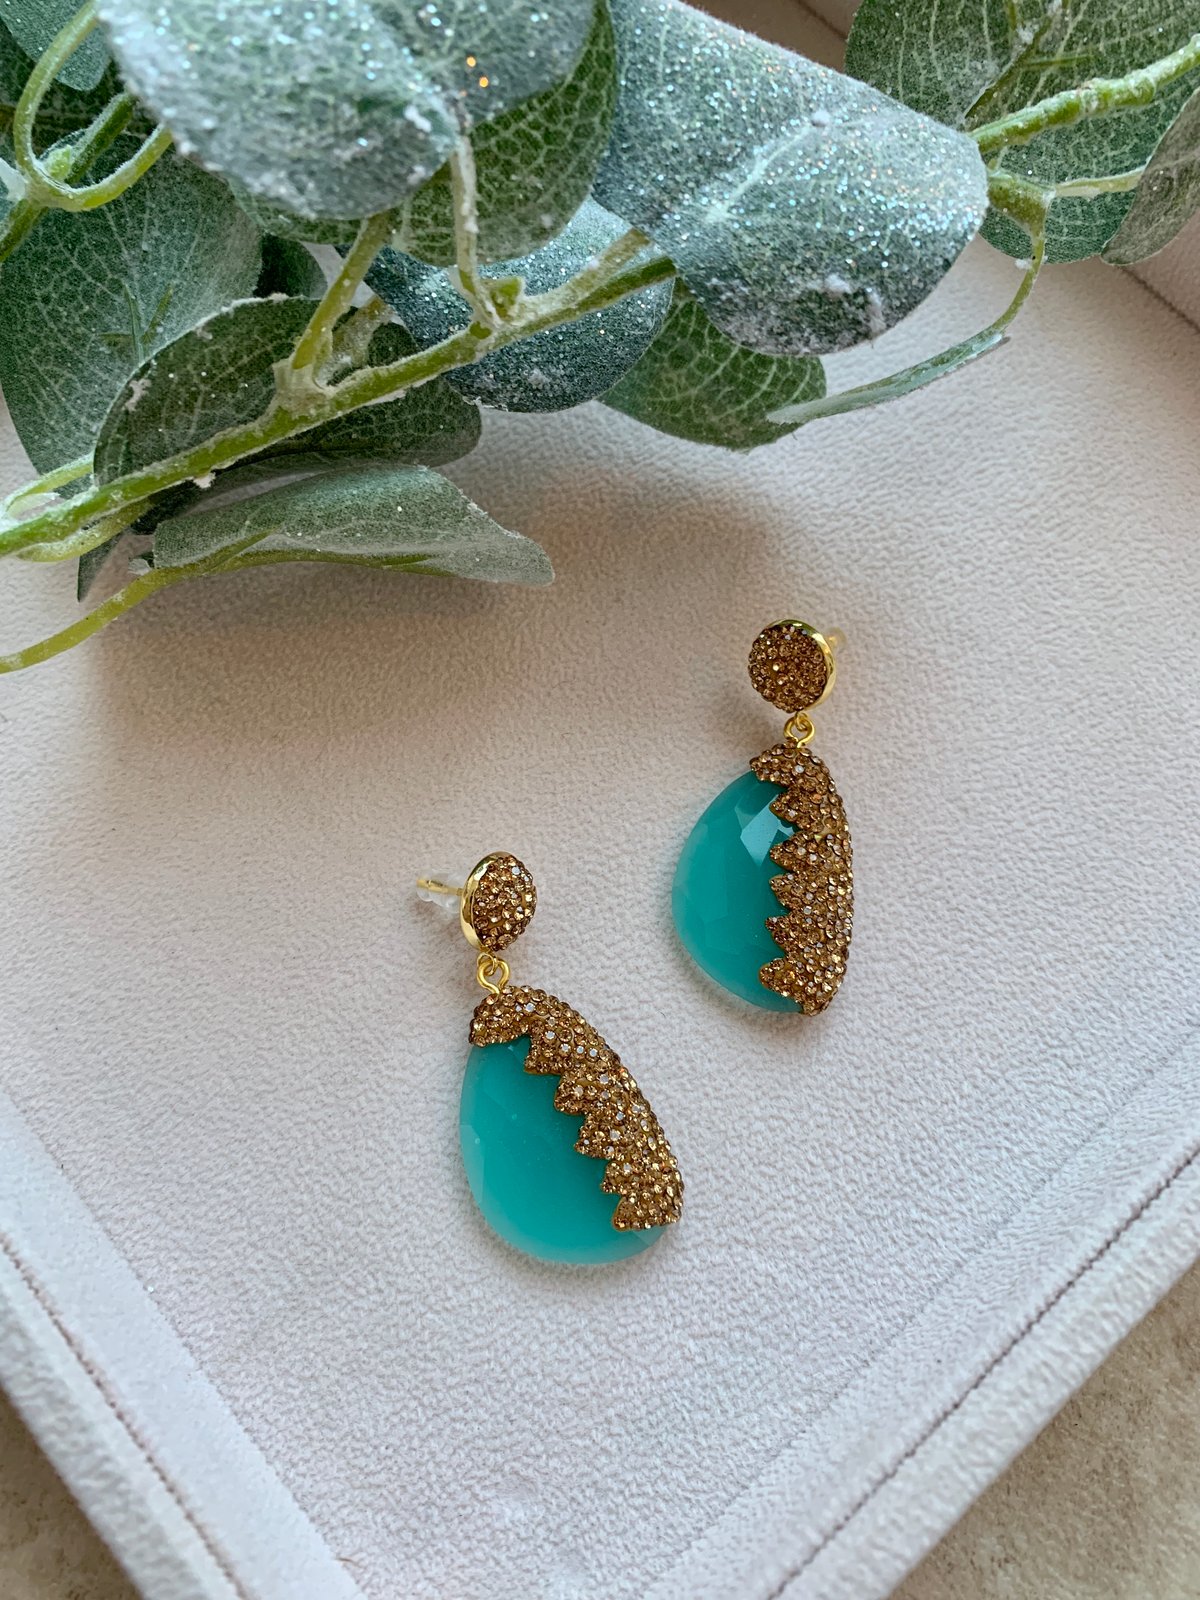 Mary Earrings - Turquoise